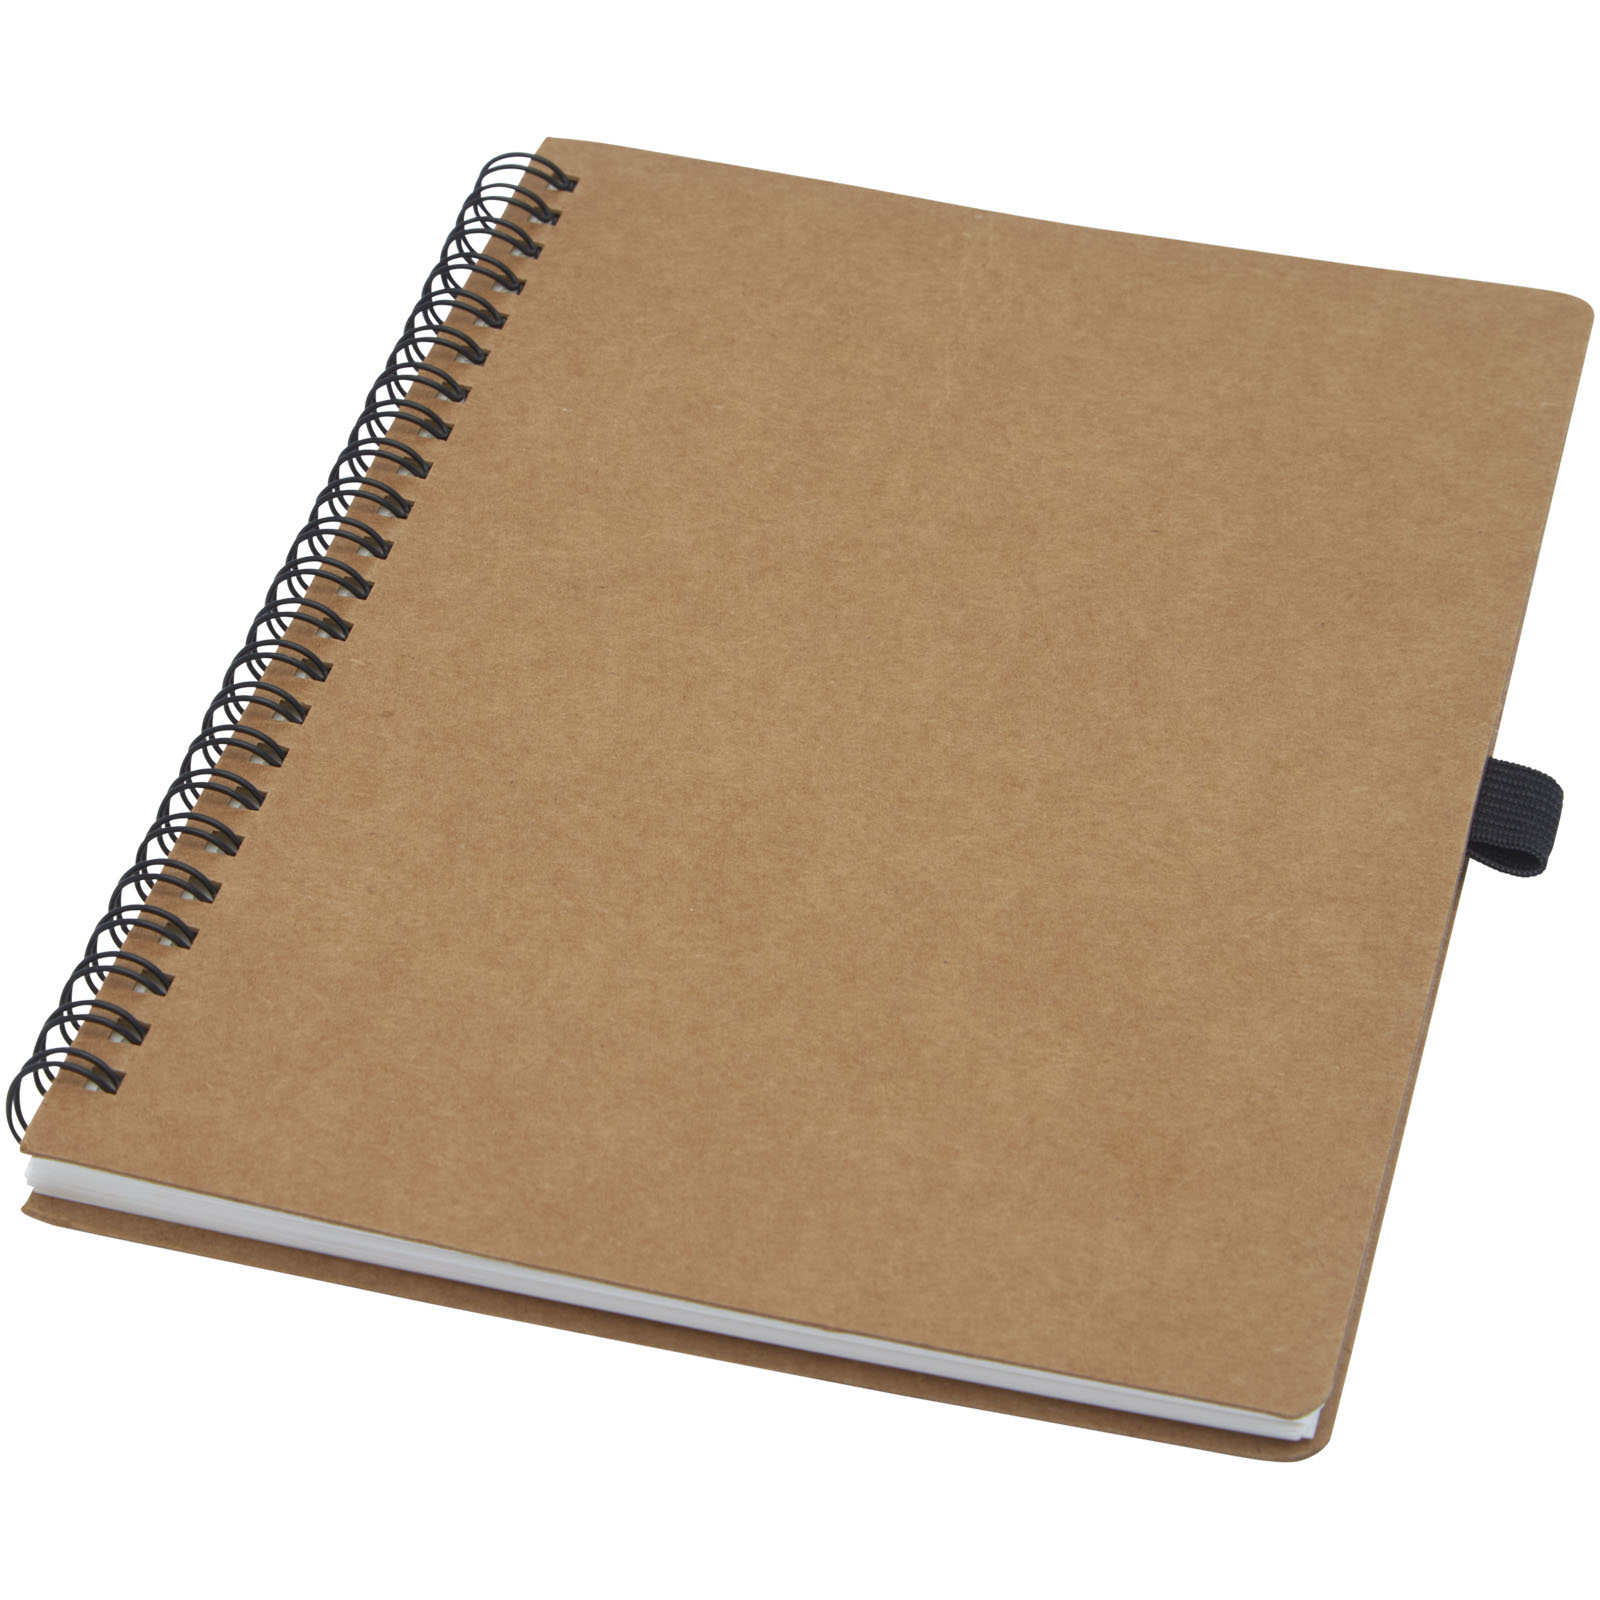 Notebooks - Cobble A5 wire-o recycled cardboard notebook with stone paper